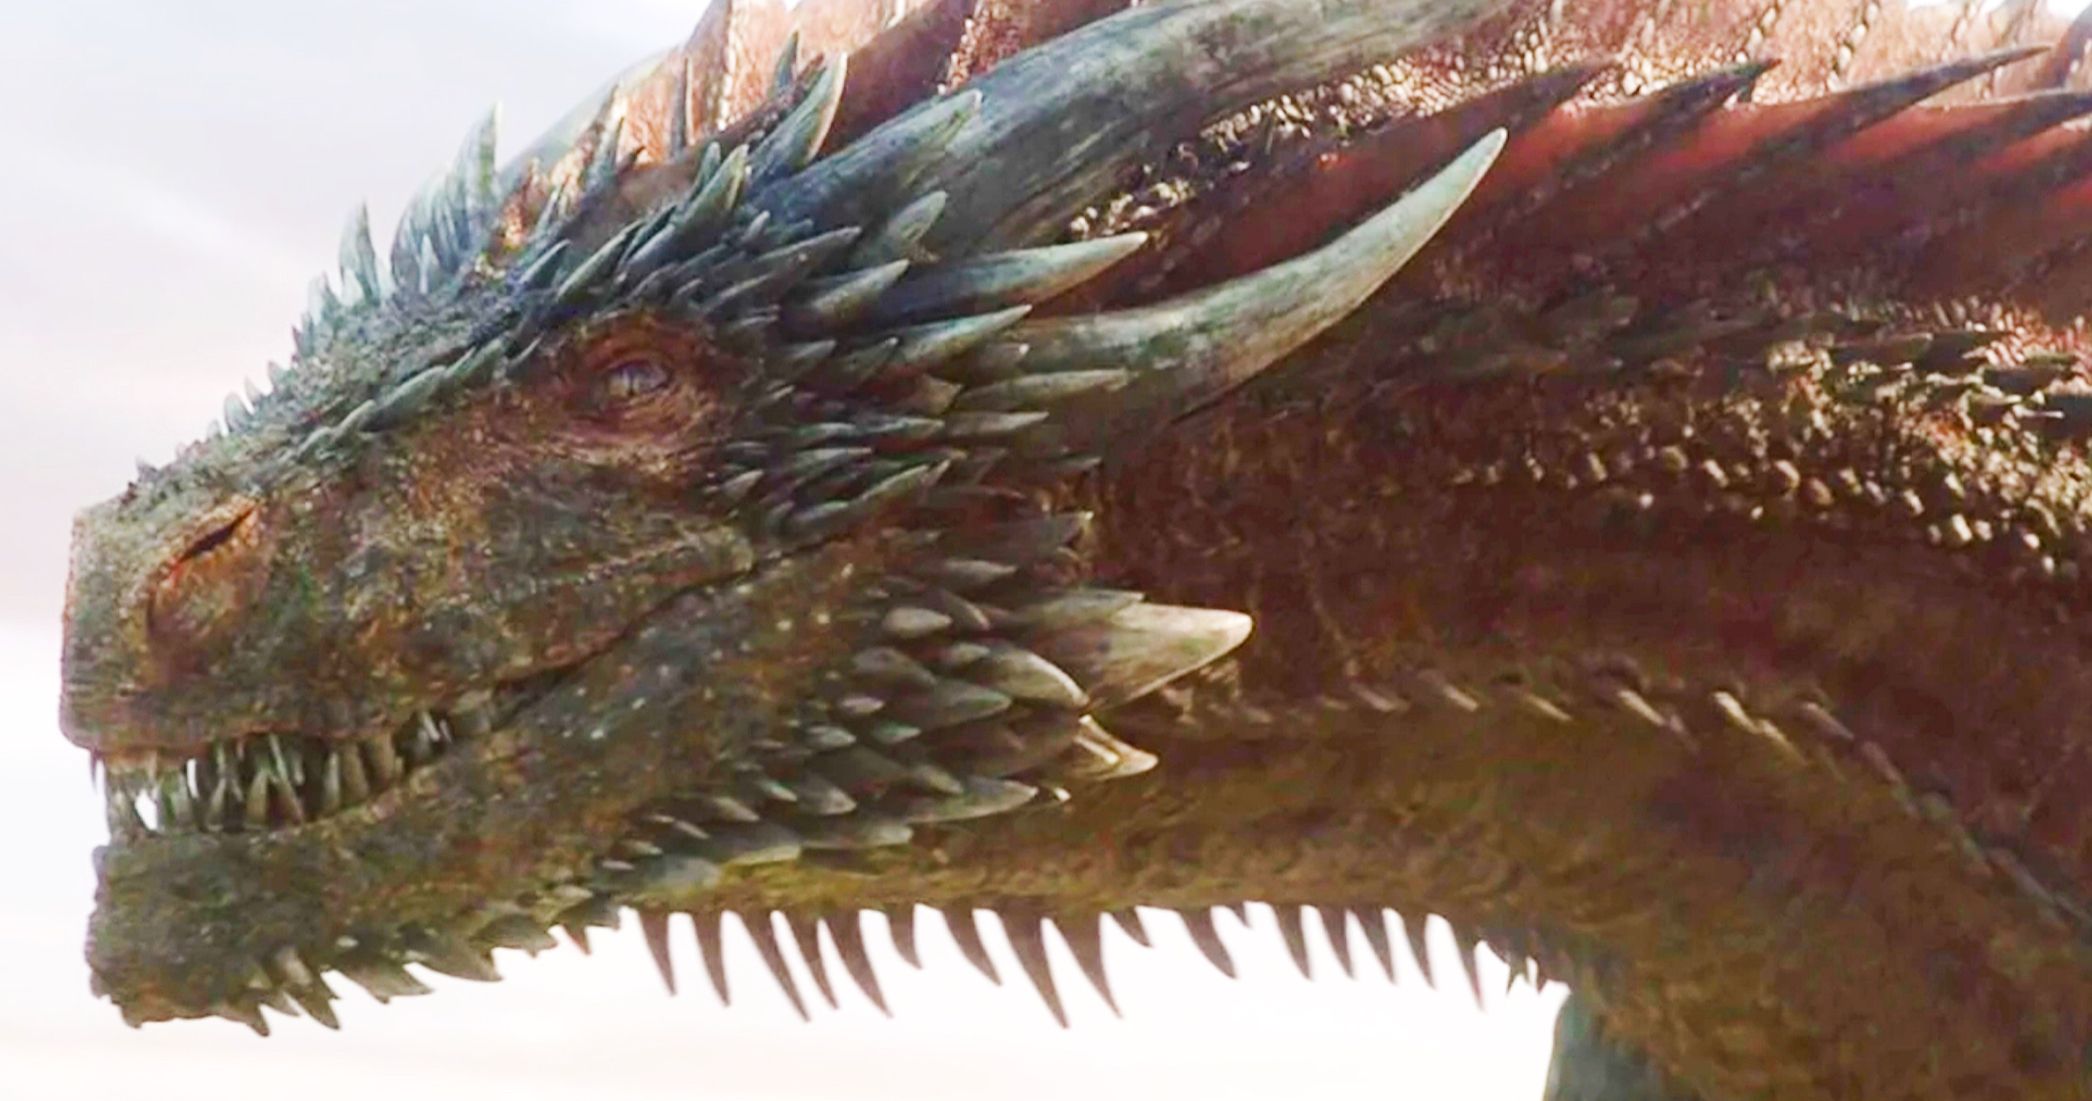 Game of Thrones Prequel House of the Dragon Begins Production, Cast Photos Revealed